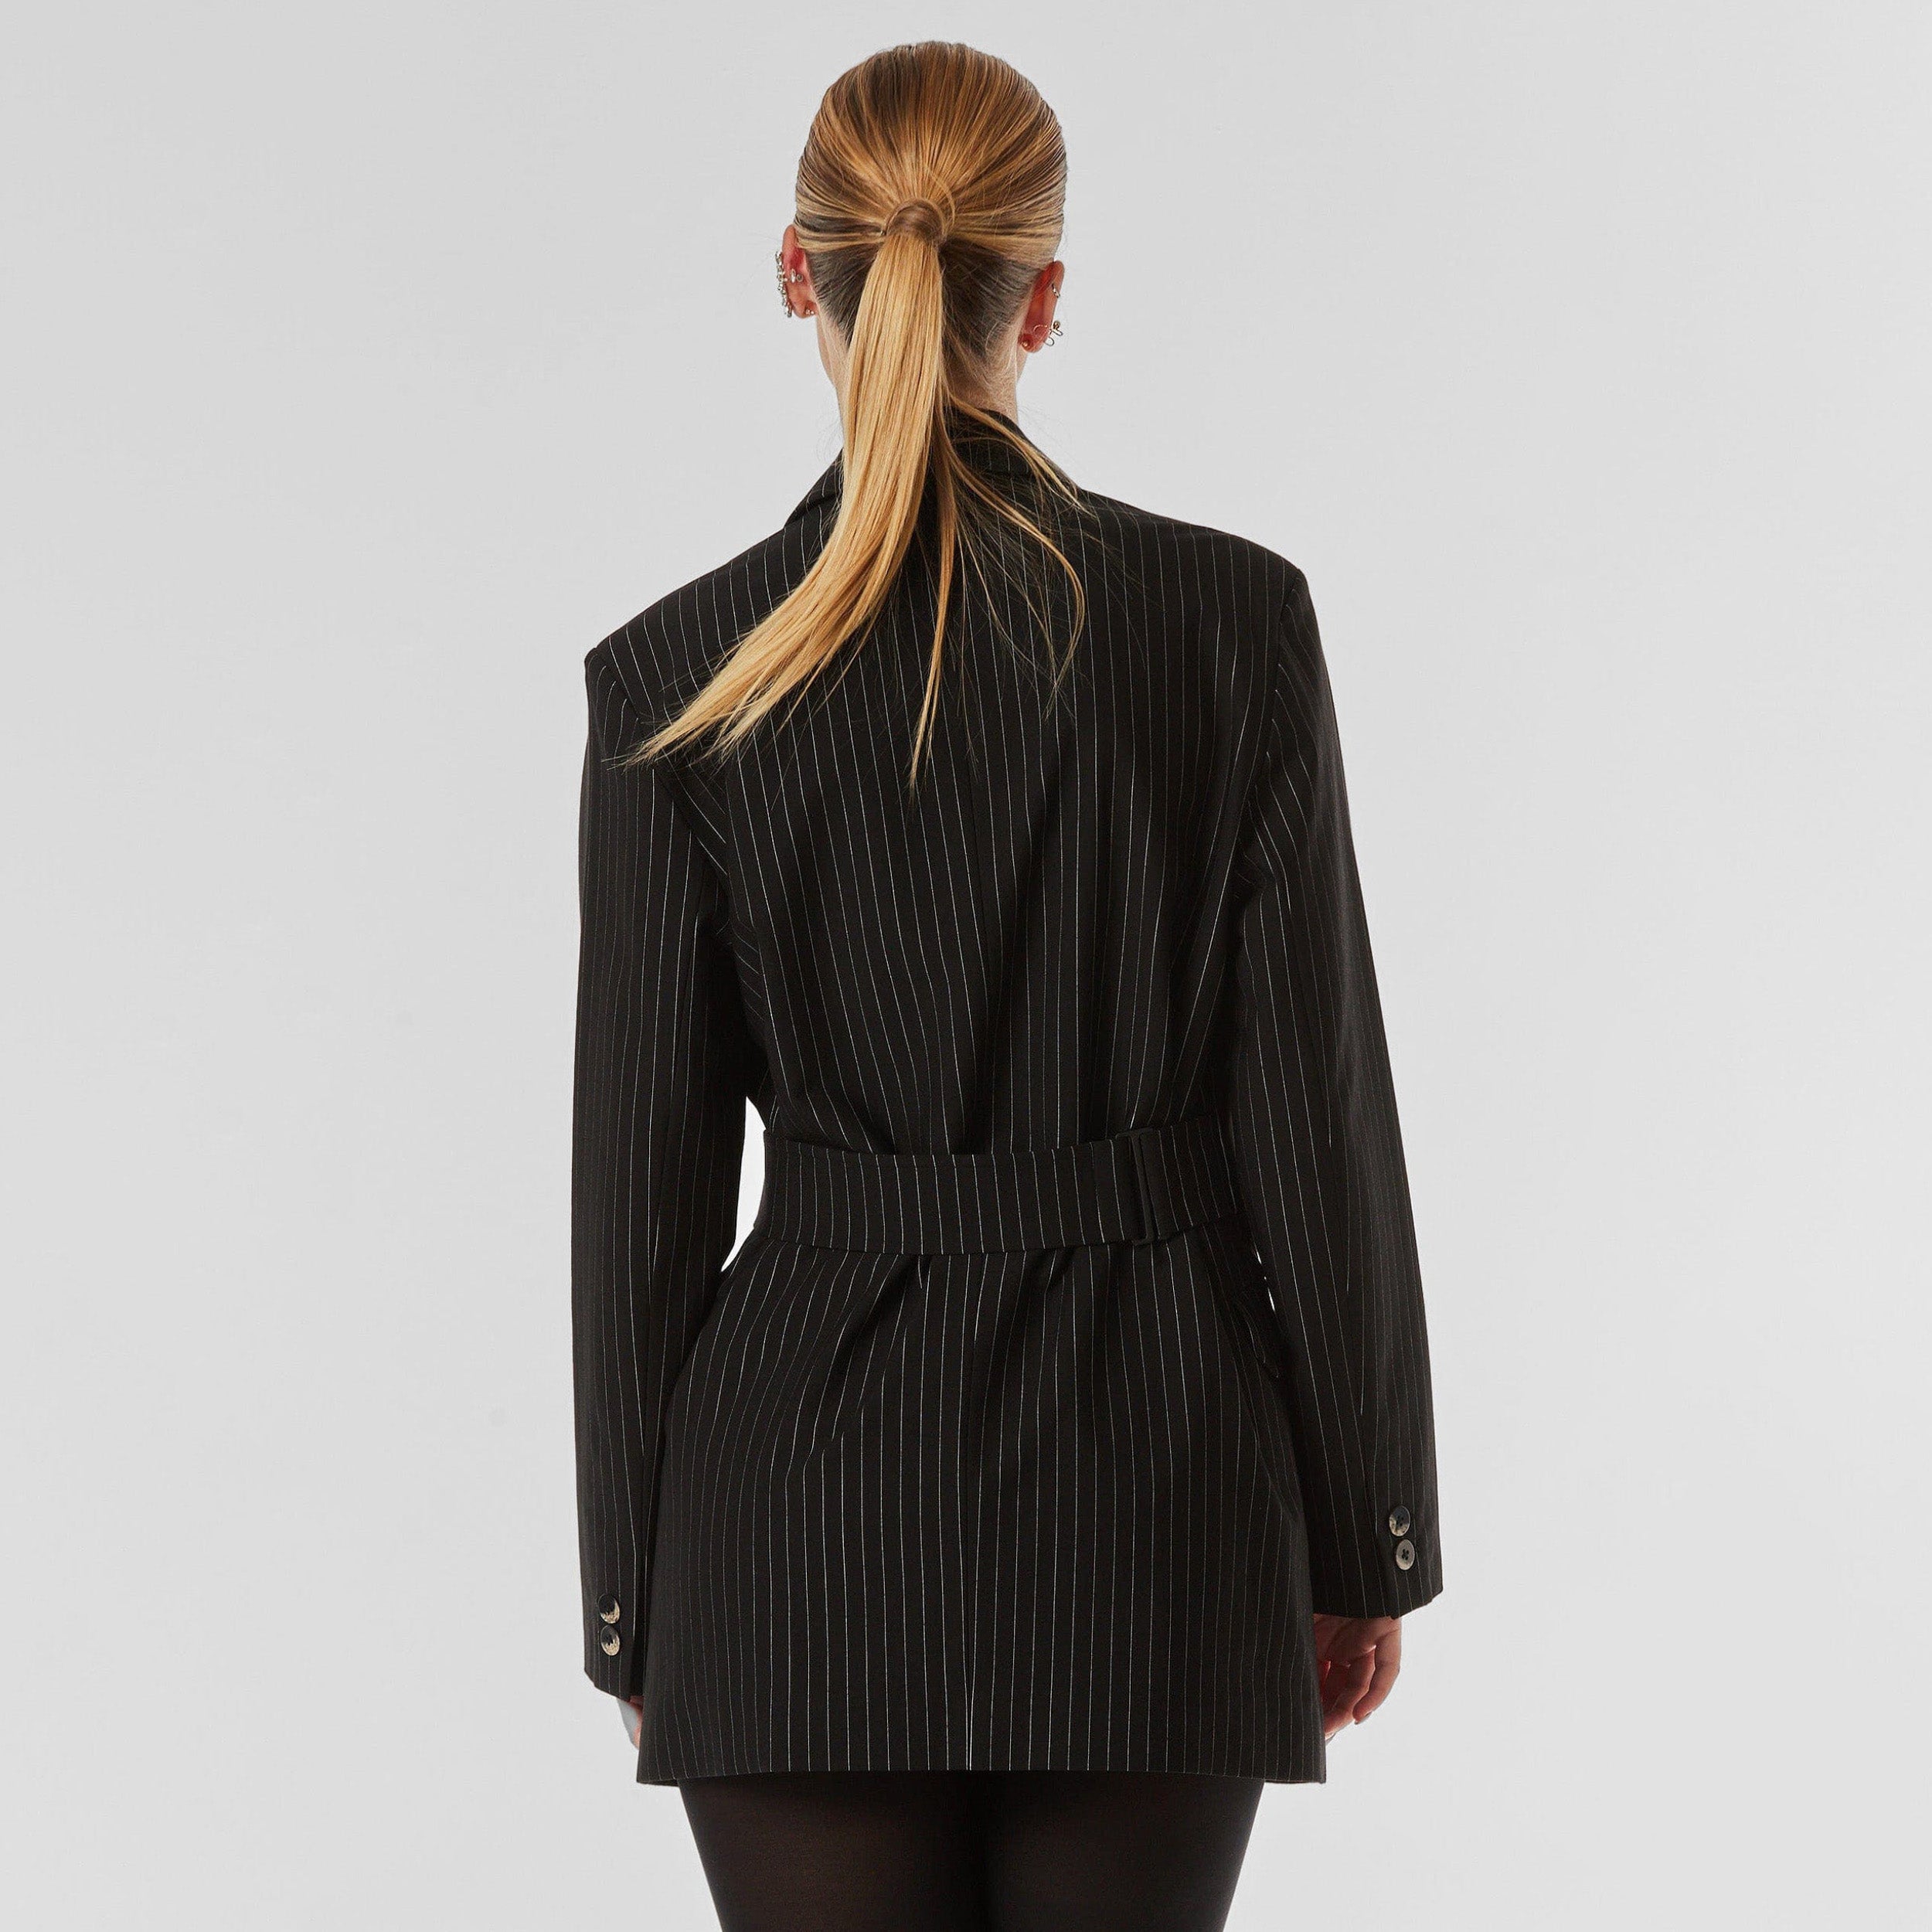 Rear view of woman wearing black pinstripe blazer, featuring peaked lapel, flap pockets, detachable belt with button closure, flap pockets and silky lining.